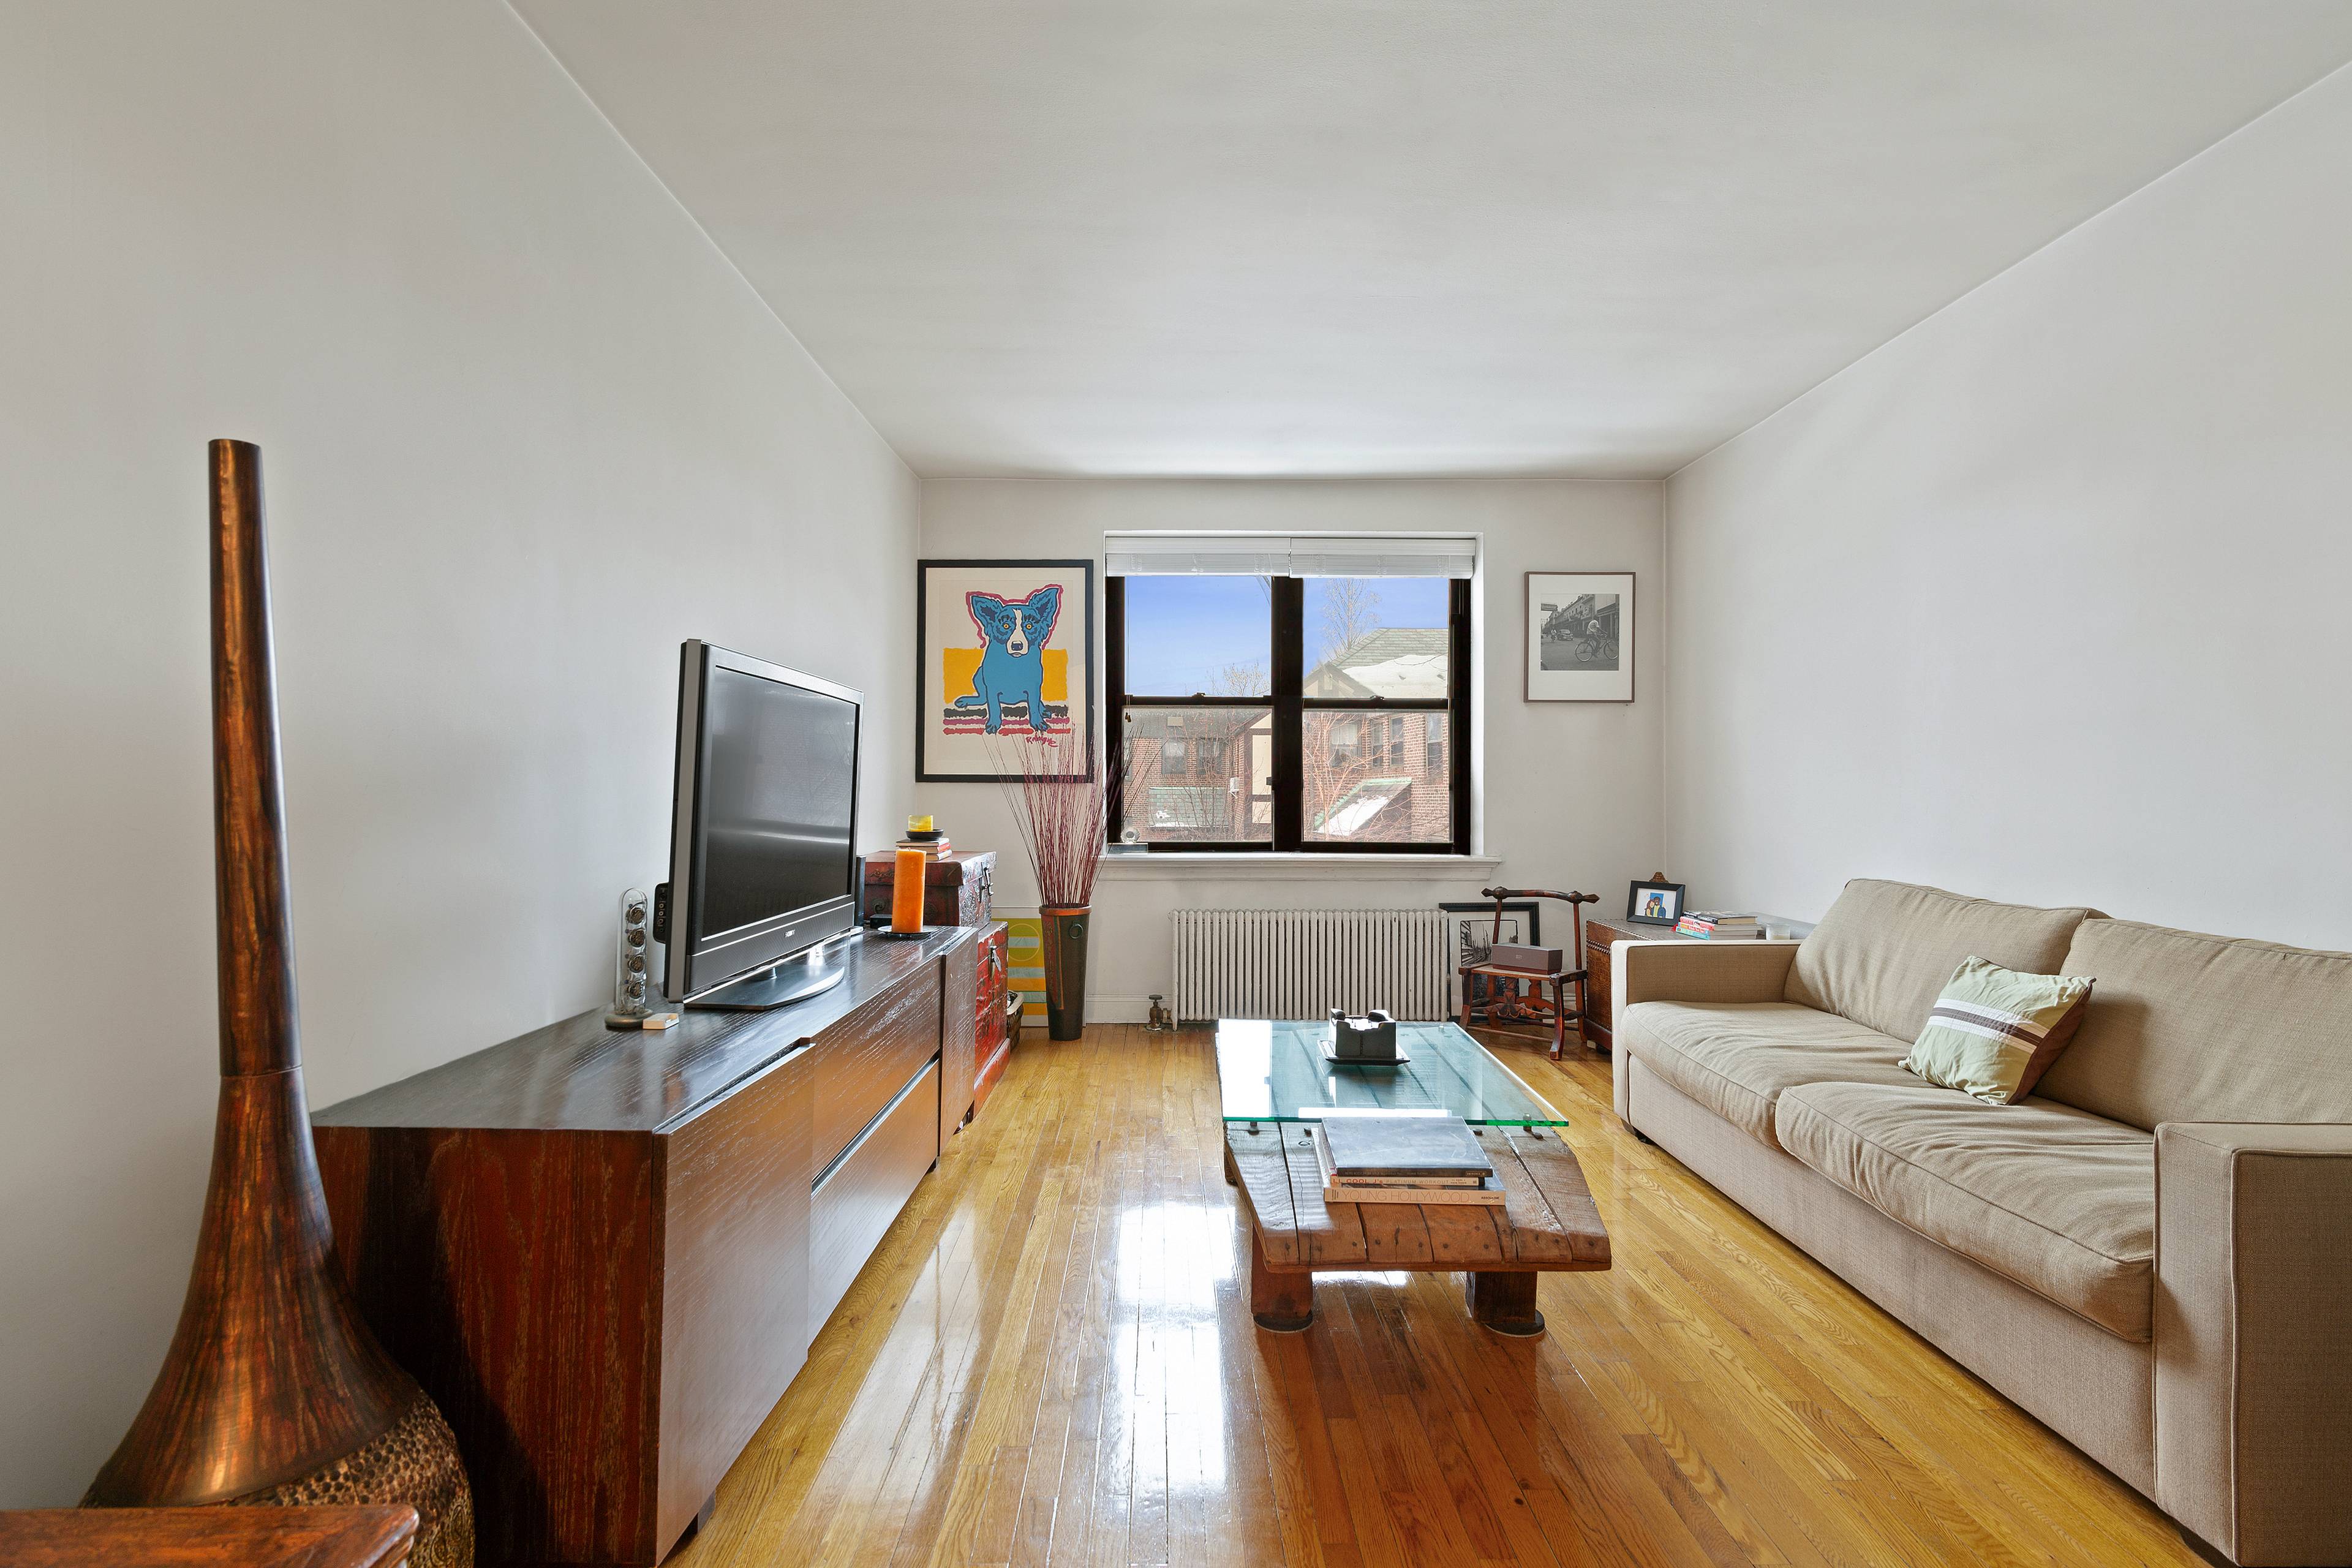 21 37 77th St, Apartment 2 is a sprawling, one bedroom condo in one of the most established and sought after neighborhoods in New York.